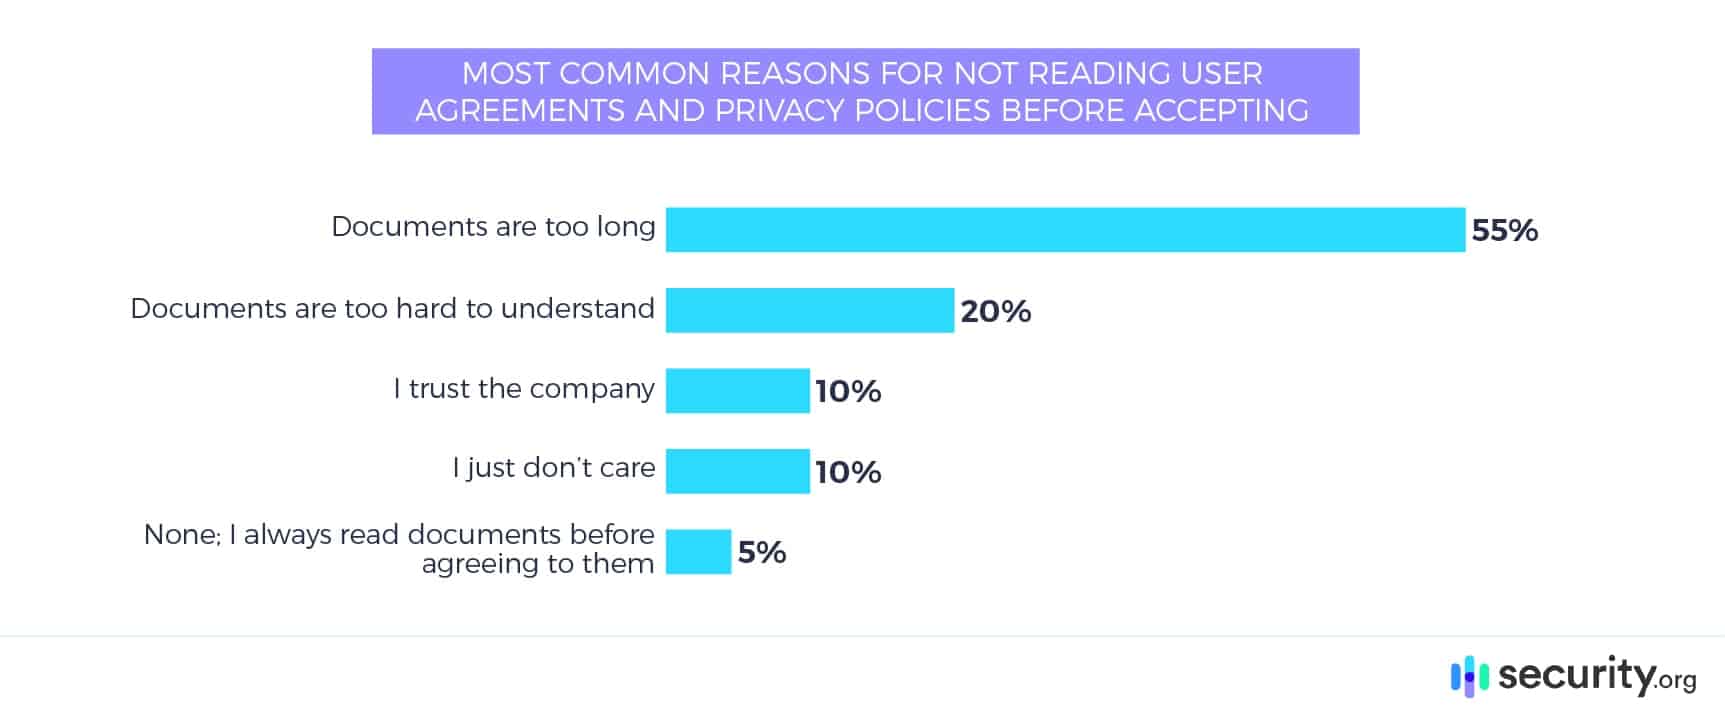 Most Common Reasons for Not Reading User Agreements and Privacy Policies Before Accepting